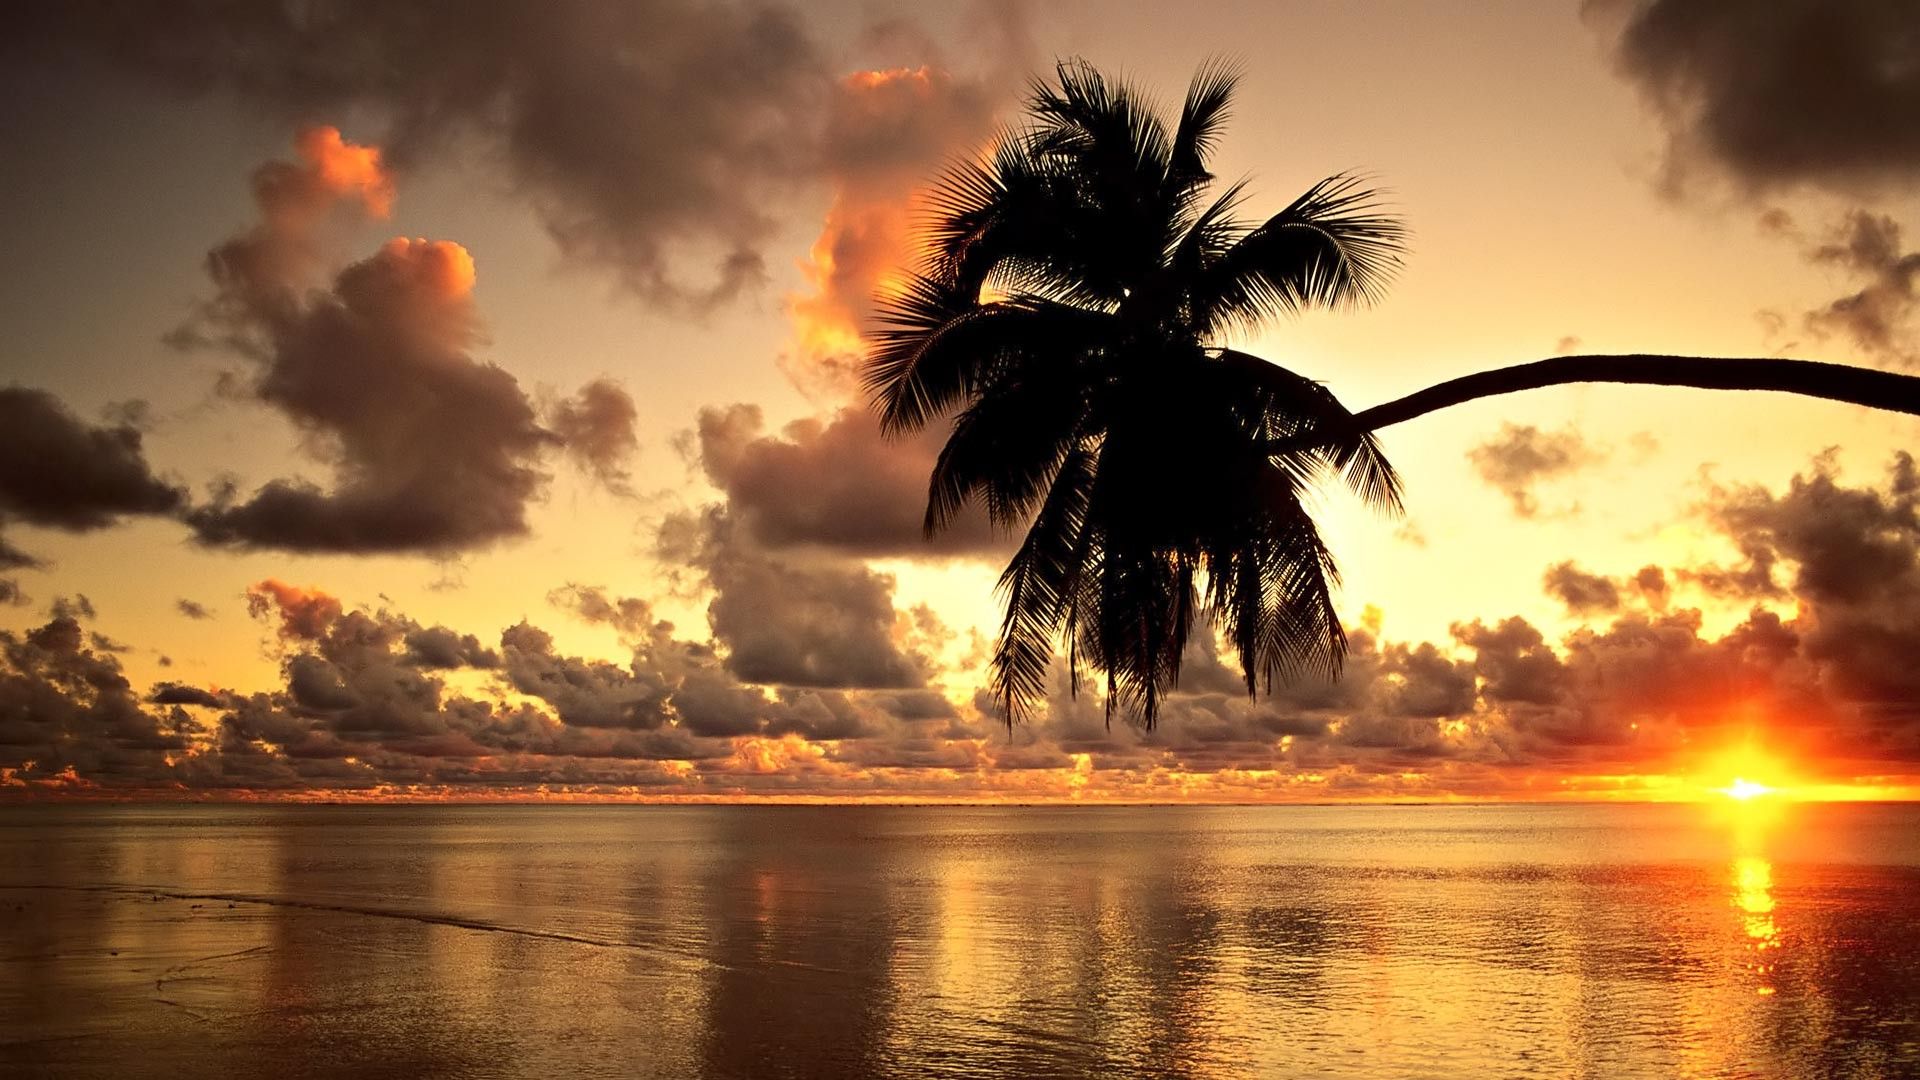 Ocean Sunset With Palm Trees - wallpaper.